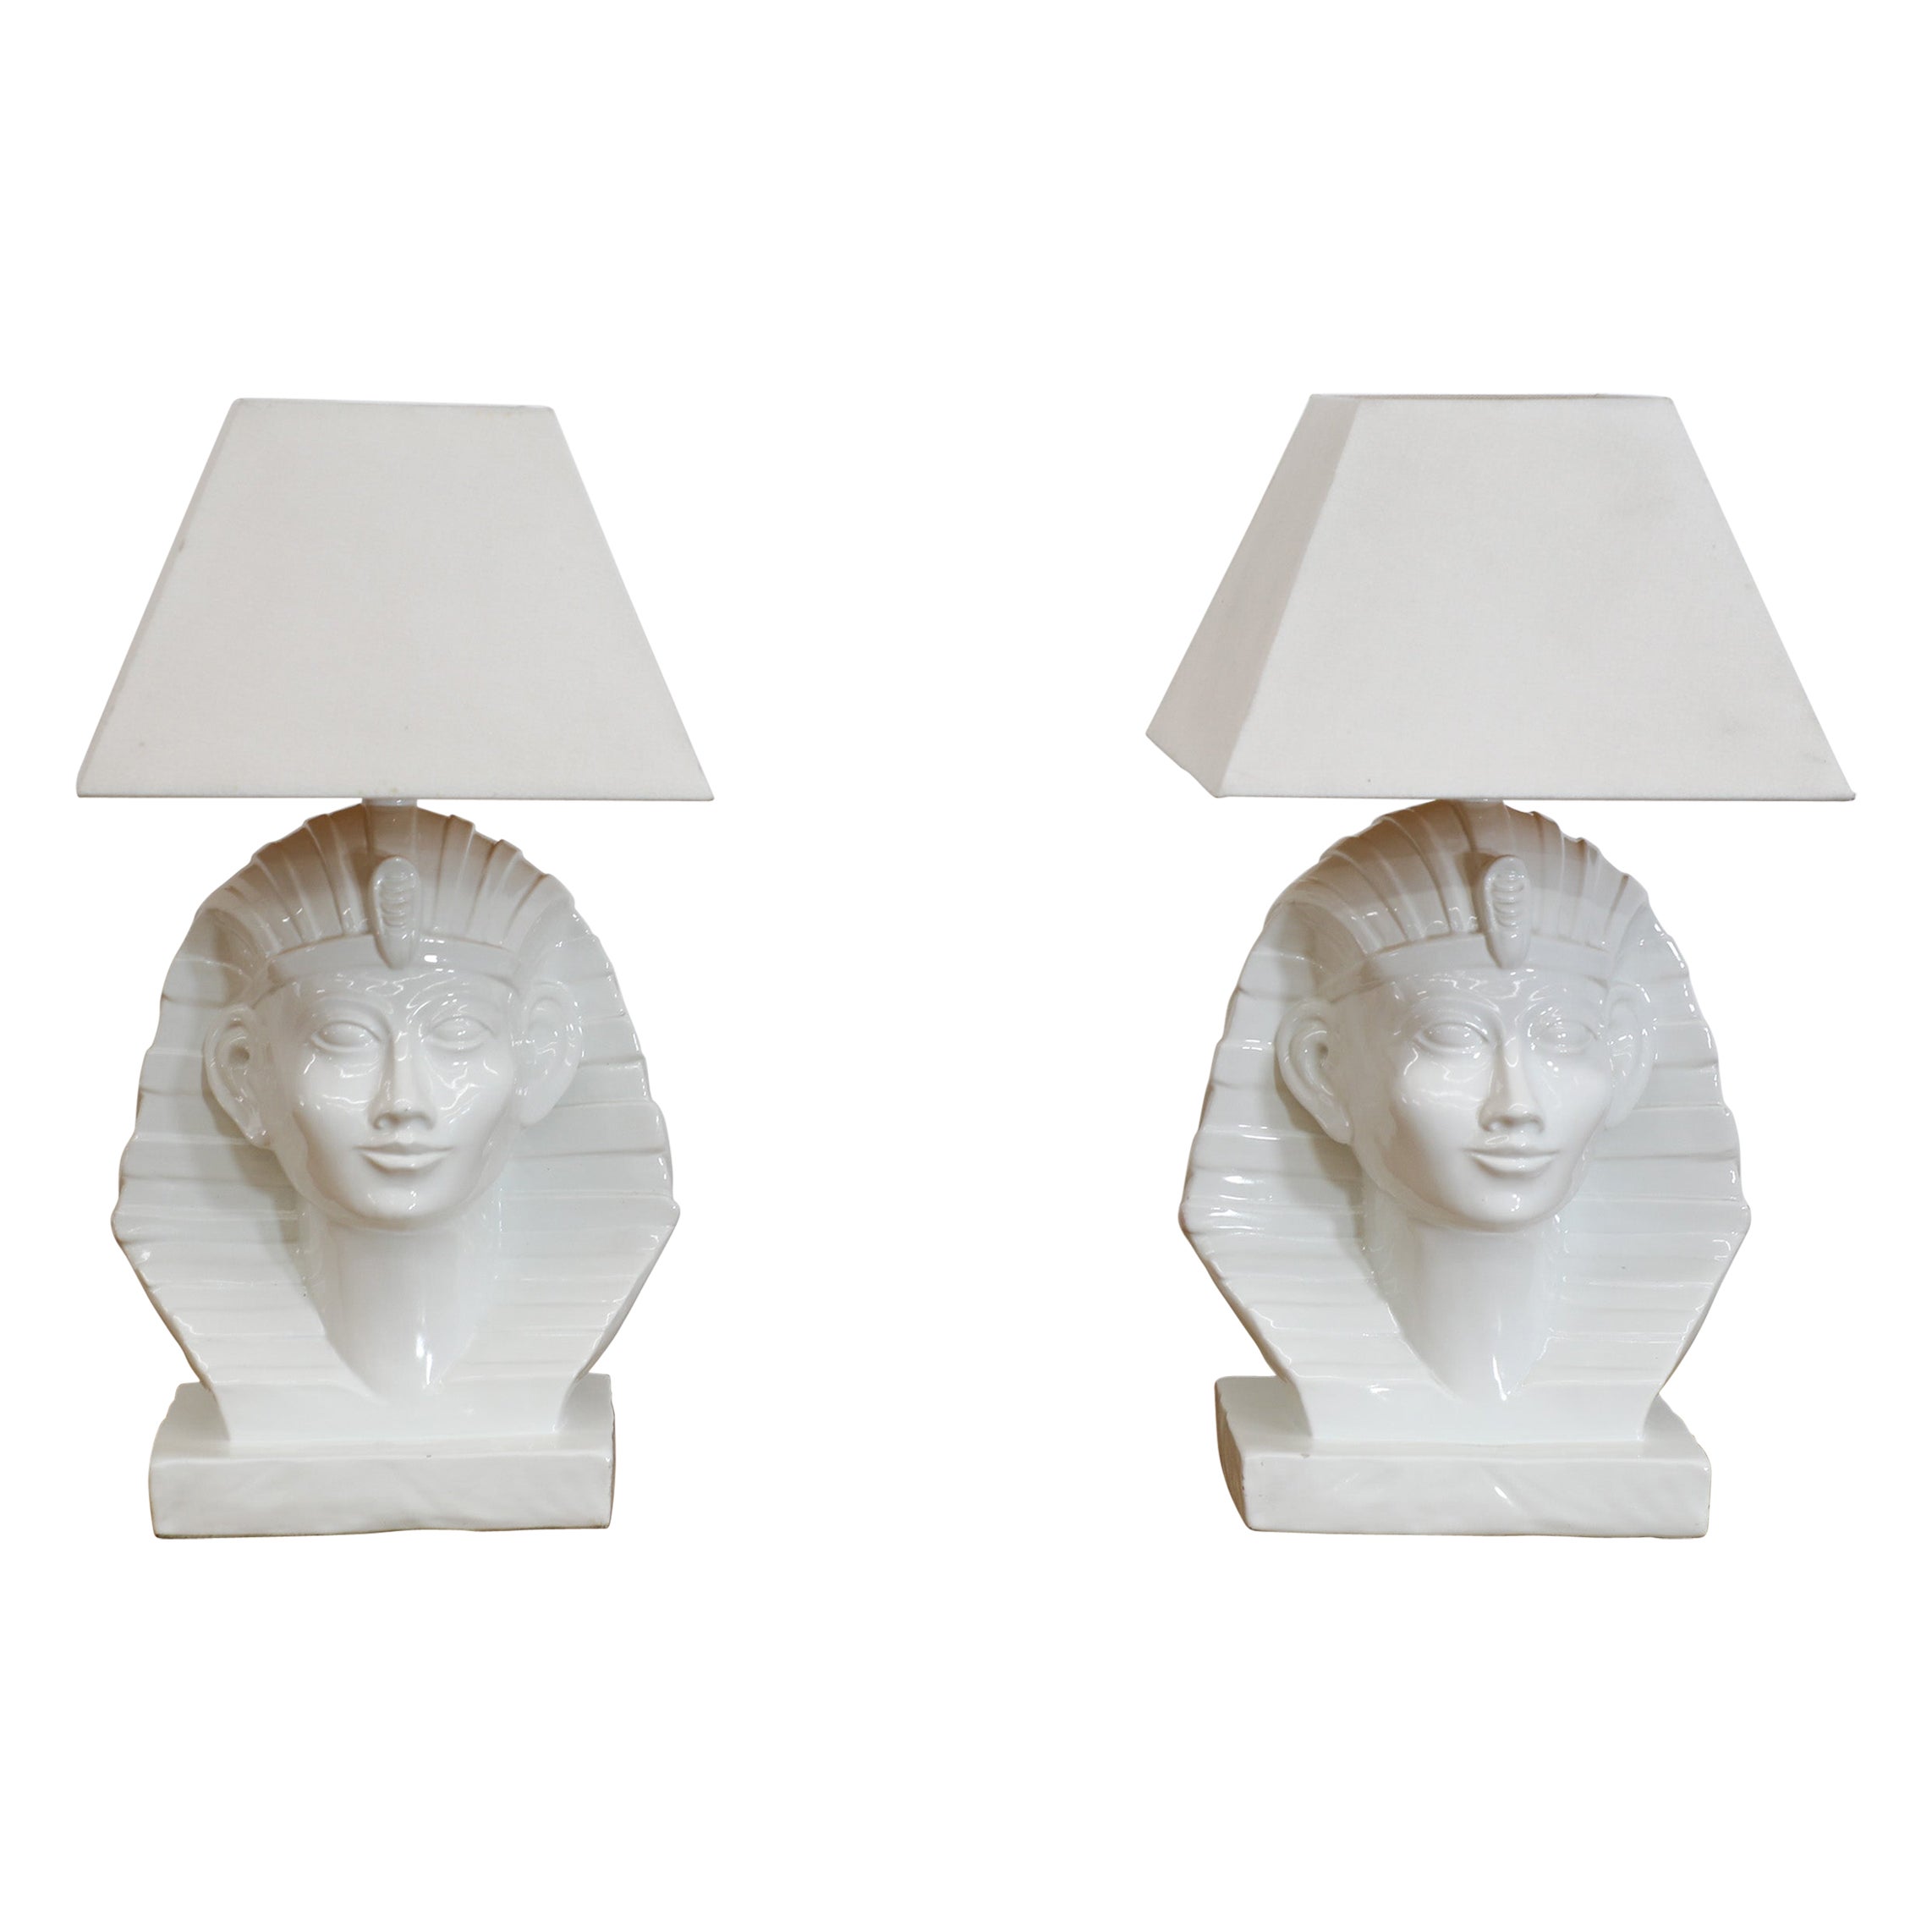 Pair of Ceramic Zaccagnini Style Egyptian Pharaoh Table Lamps